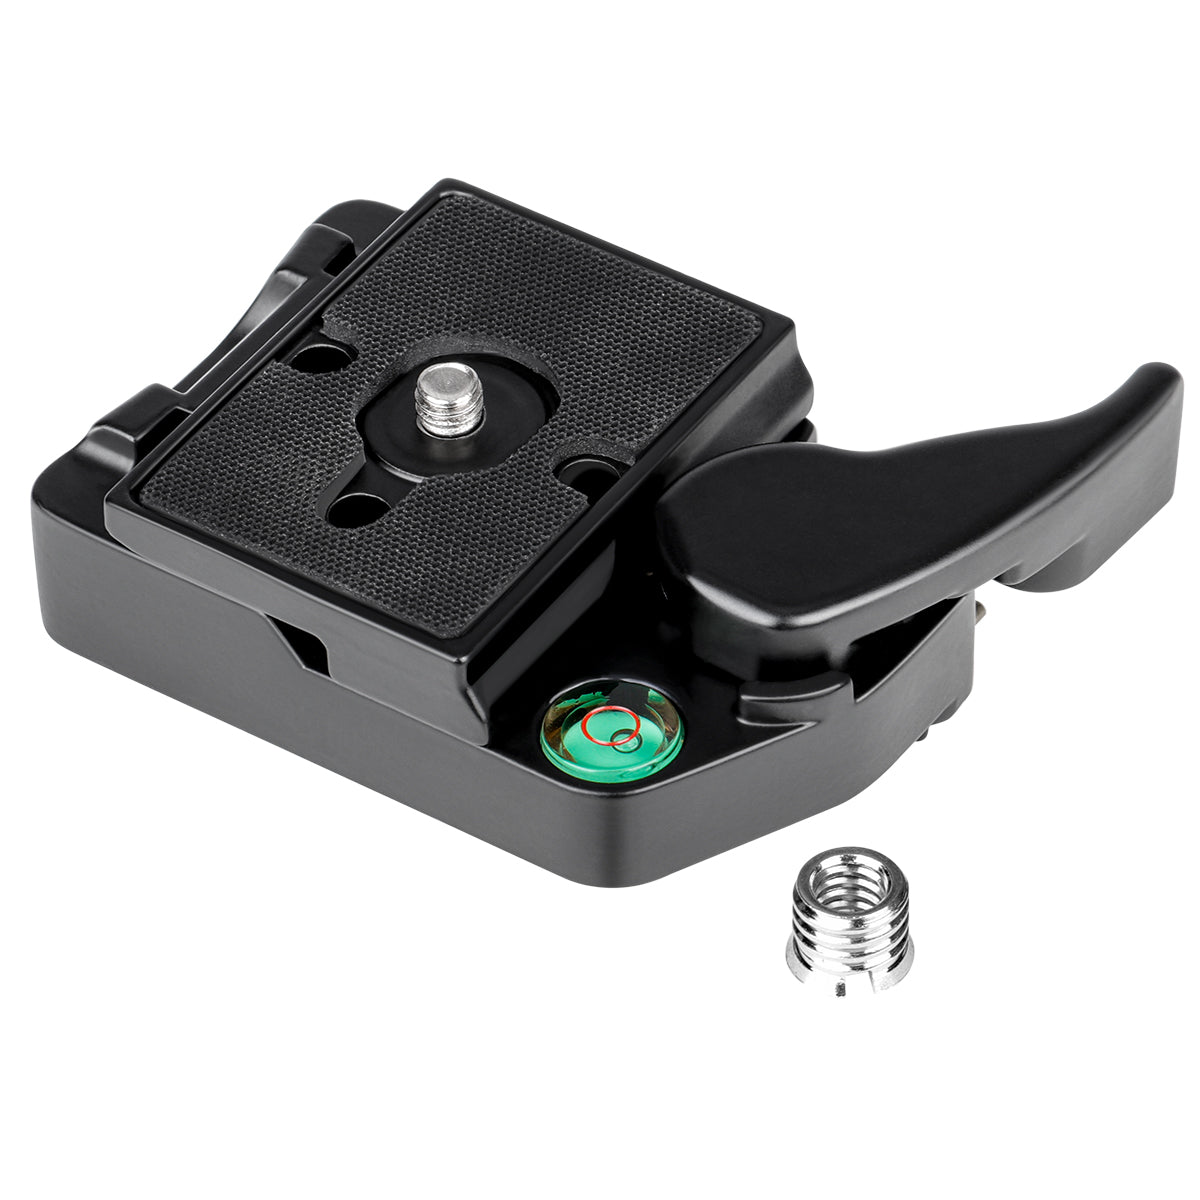 Camera 323 Quick Release Adapter for Manfrotto Tripod 200PL-14 Compat Plate (Black)